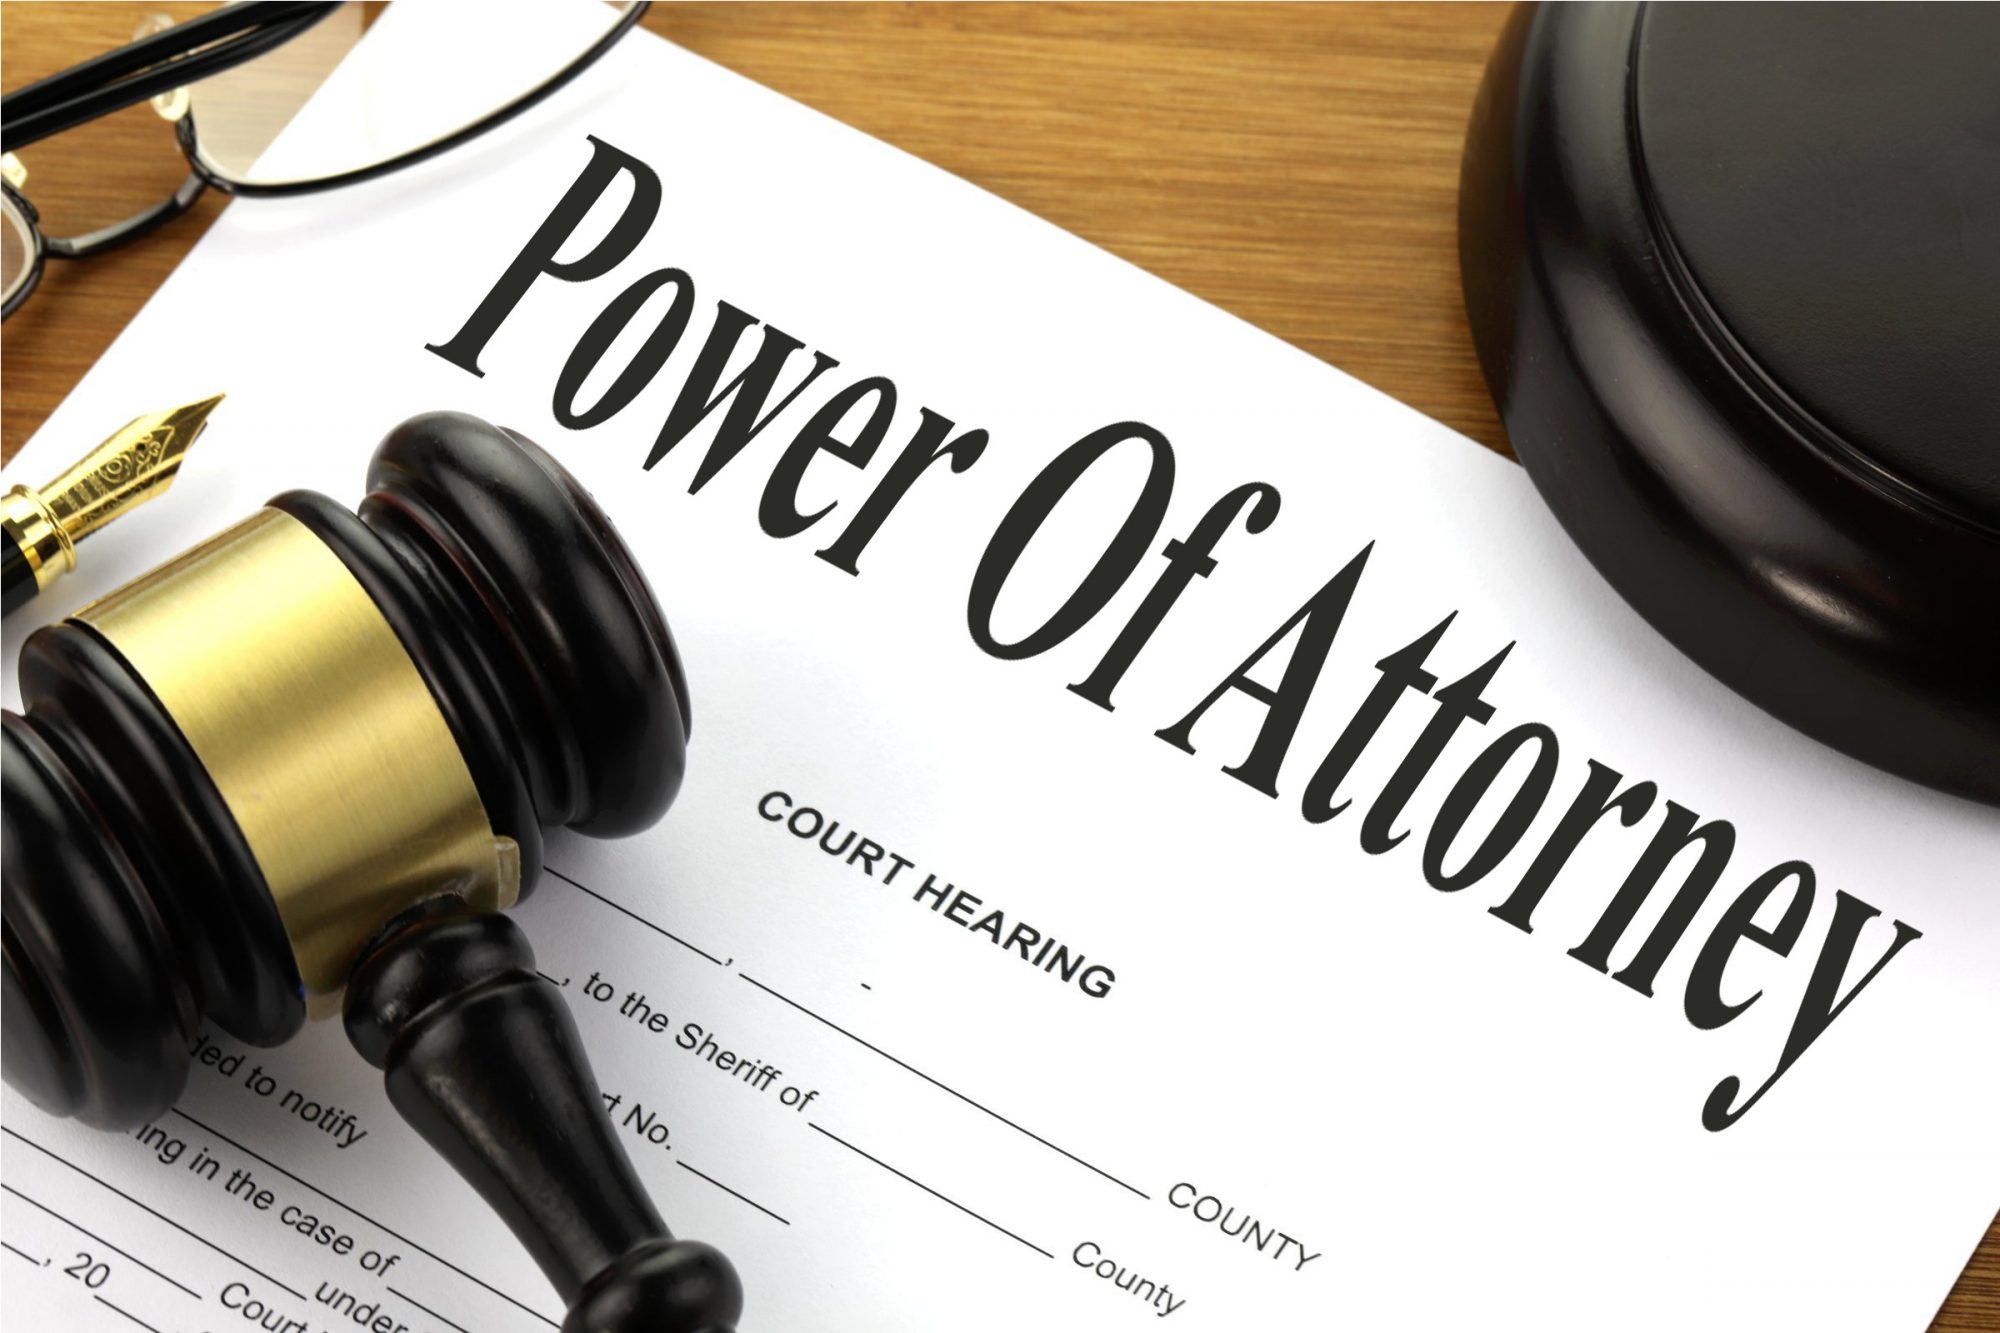 Enduring Power of Attorney: preparing for the future